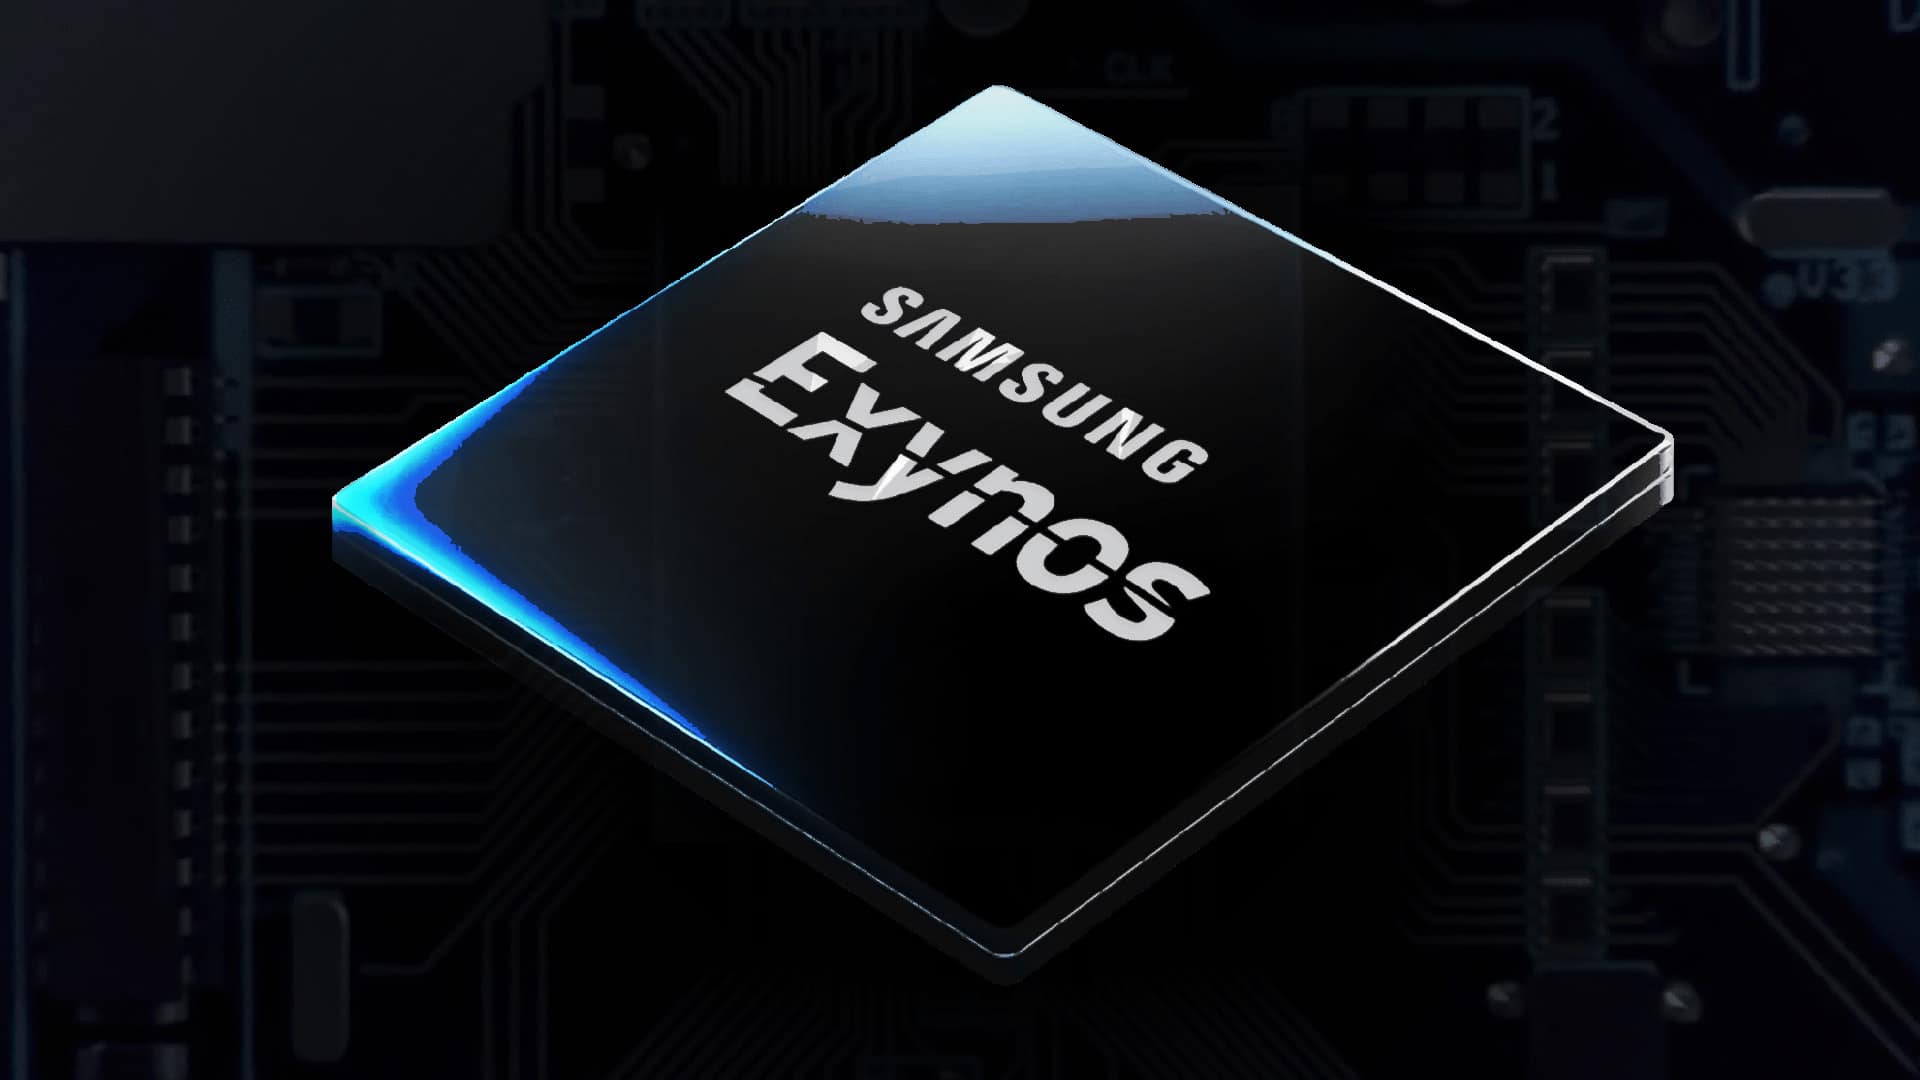 exynos processor coming to Samsung and phones